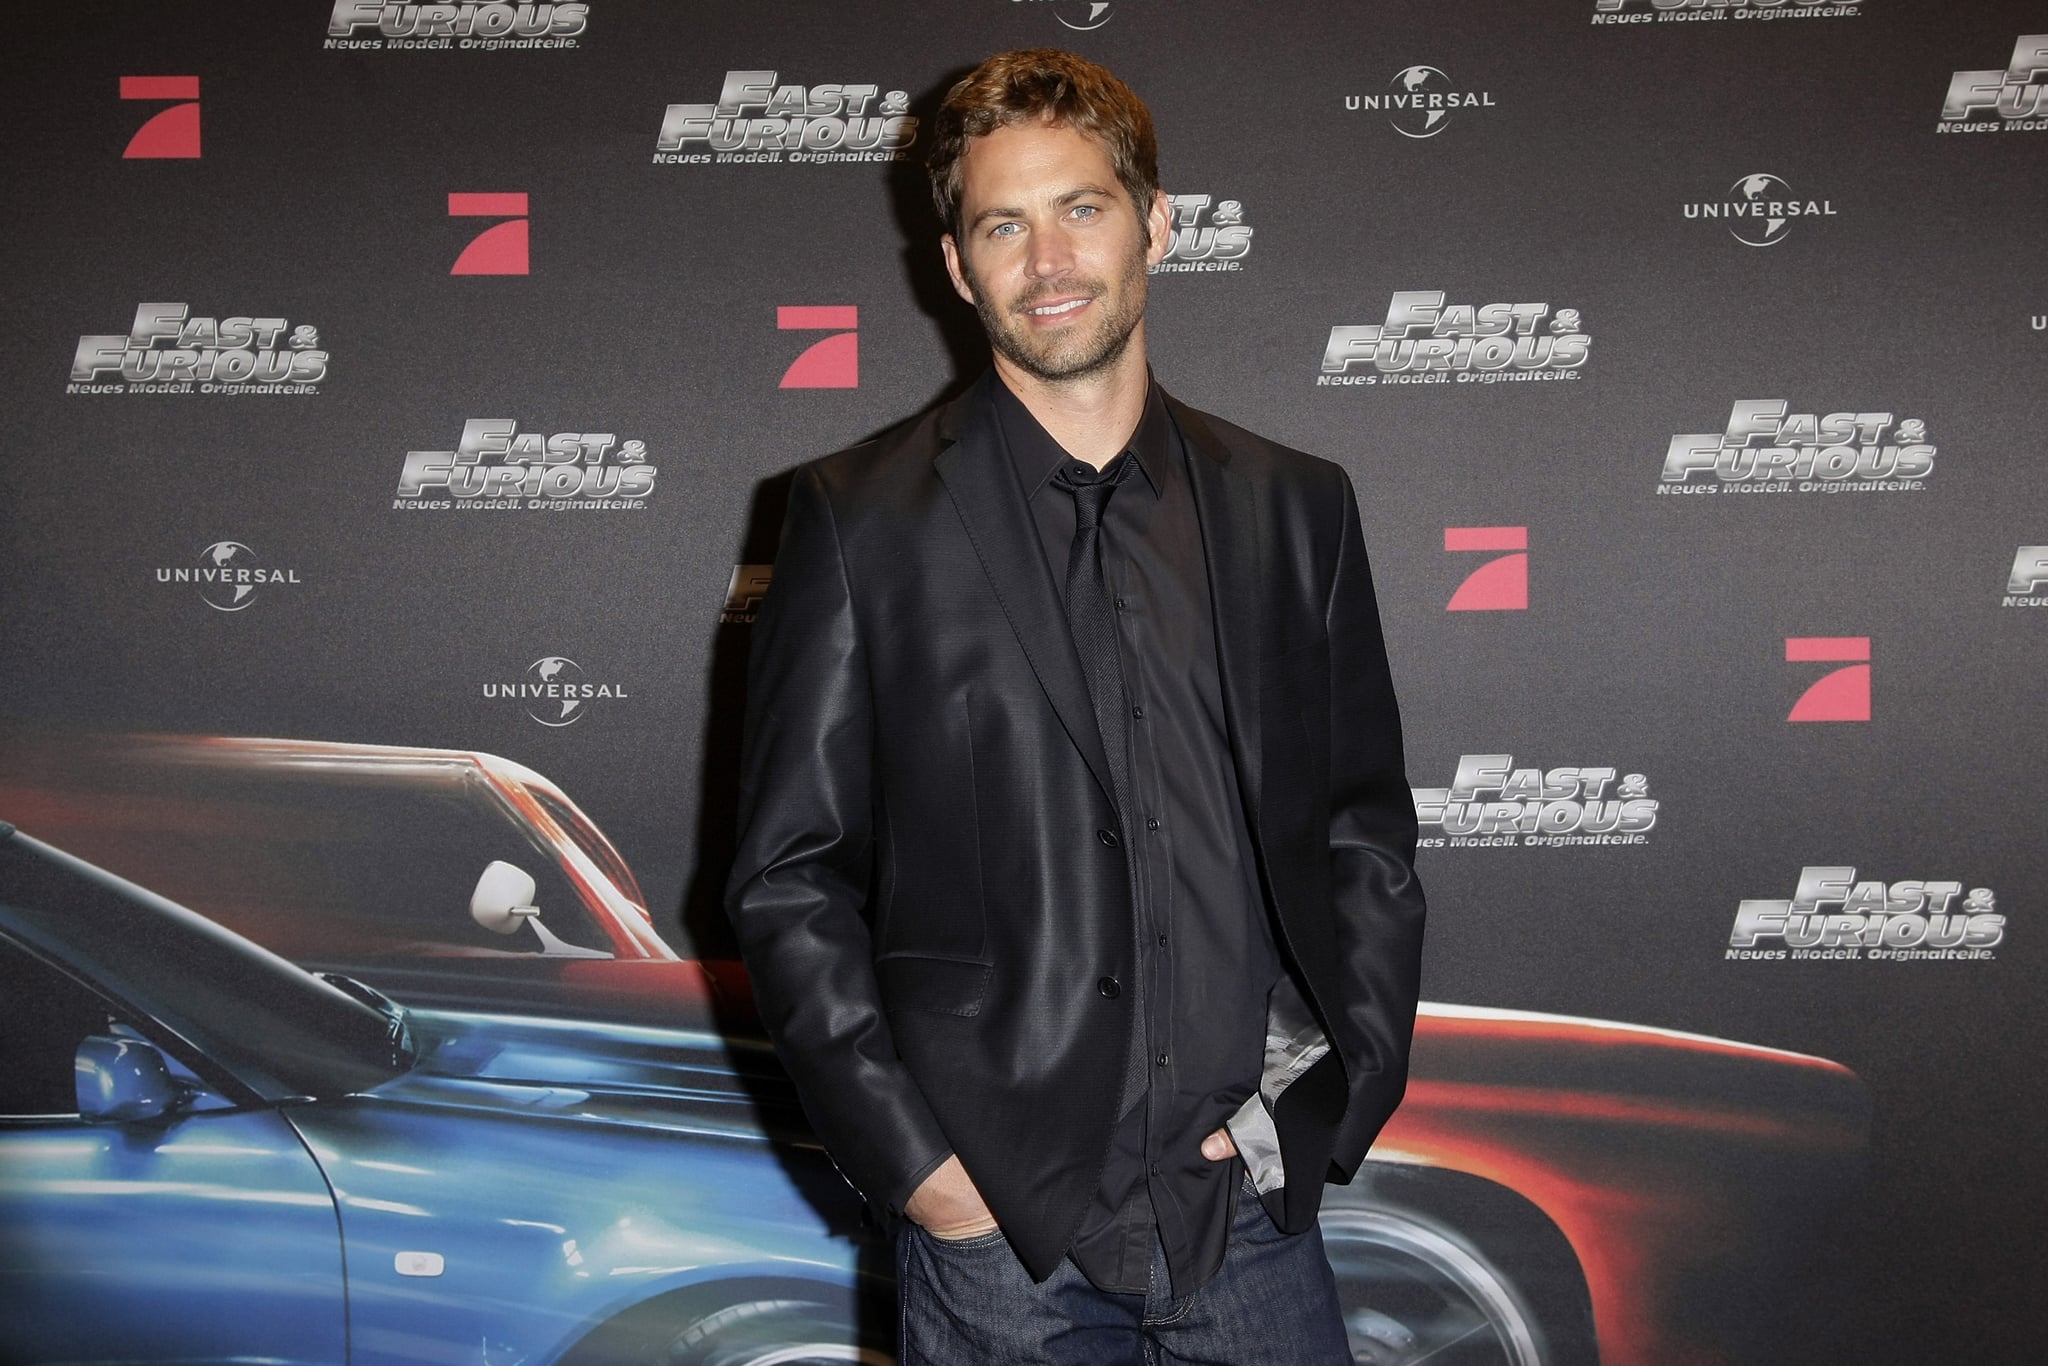 BOCHUM, GERMANY - MARCH 17:  Actor Paul Walker attends the europe premiere of 'The Fast and the Furious 4' at UCI cinema world at Ruhrpark on March 17, 2009 in Bochum, Germany.  (Photo by Florian Seefried/WireImage)